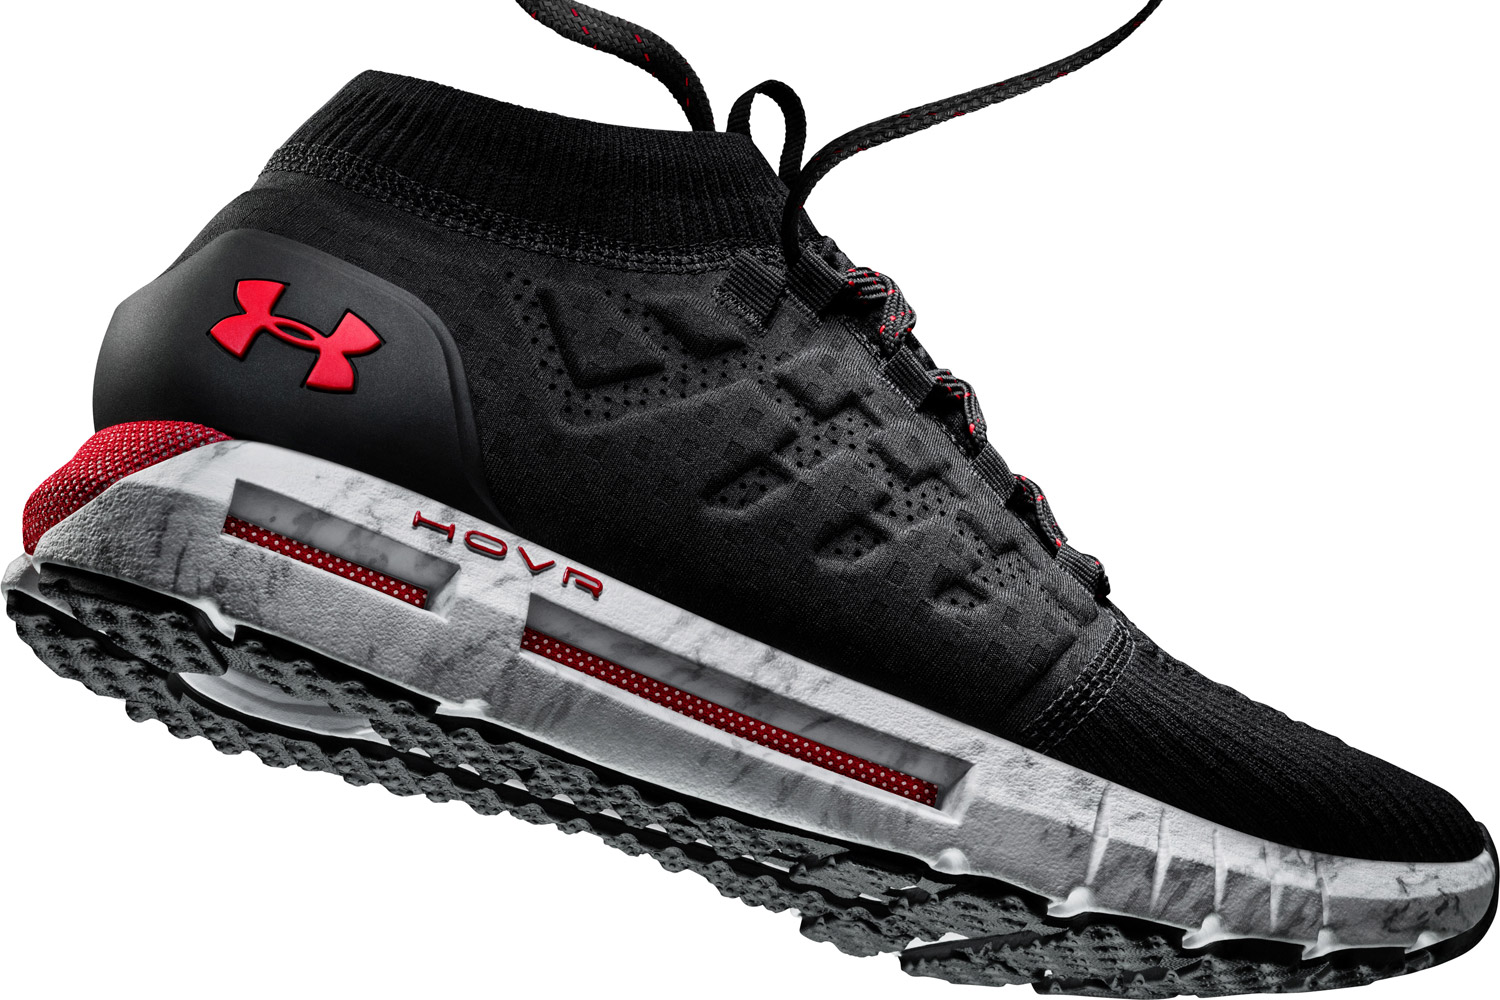 Under Armour Launches Innovative Footwear Technology 